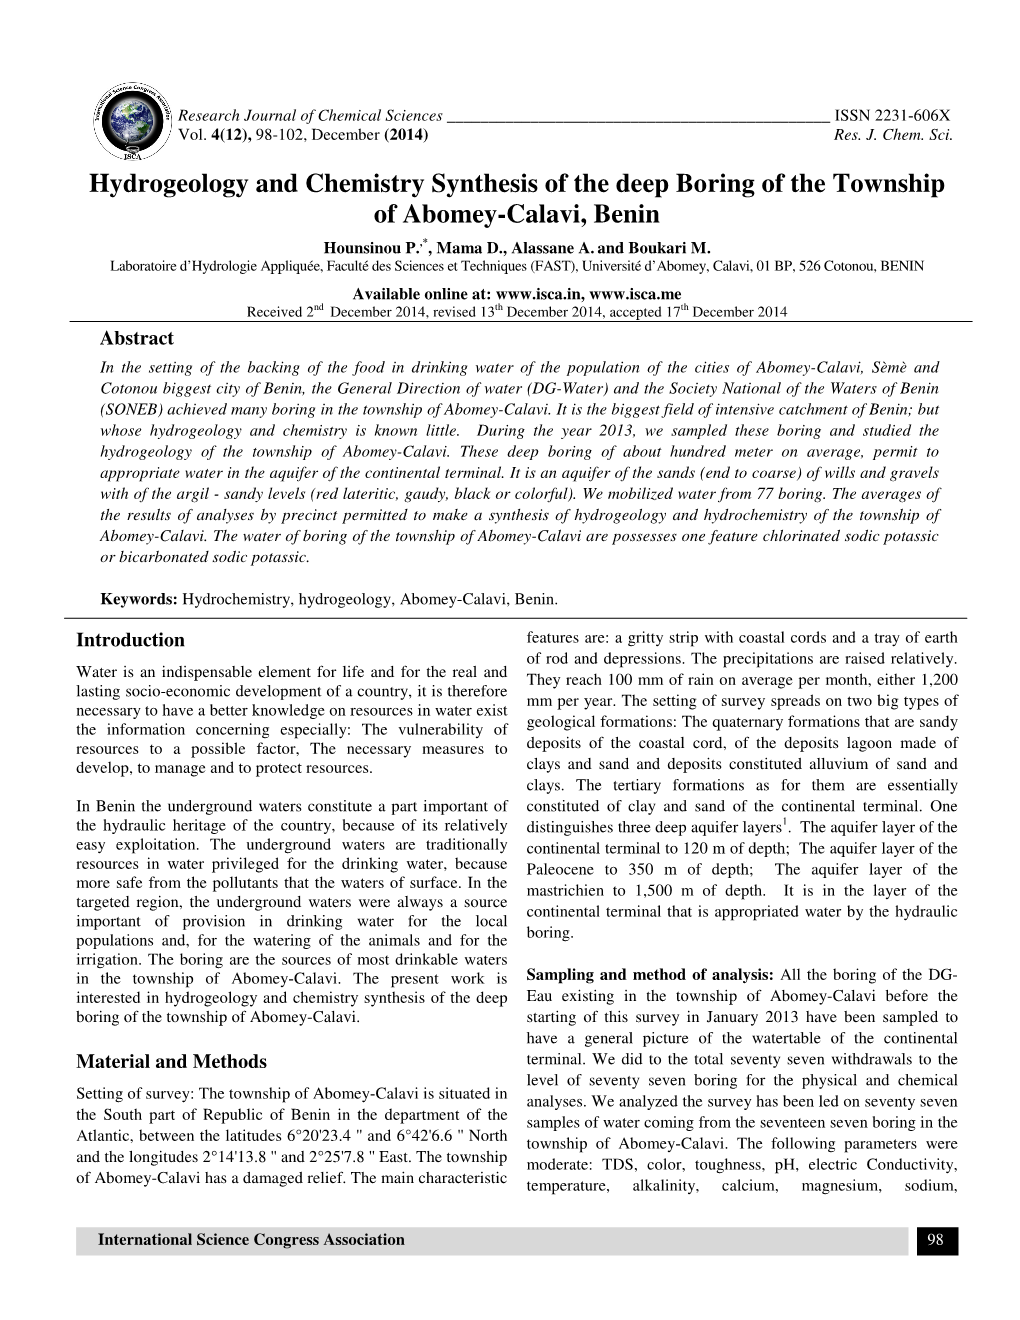 Hydrogeology and Chemistry Synthesis of the Deep Boring of the Township of Abomey-Calavi, Benin